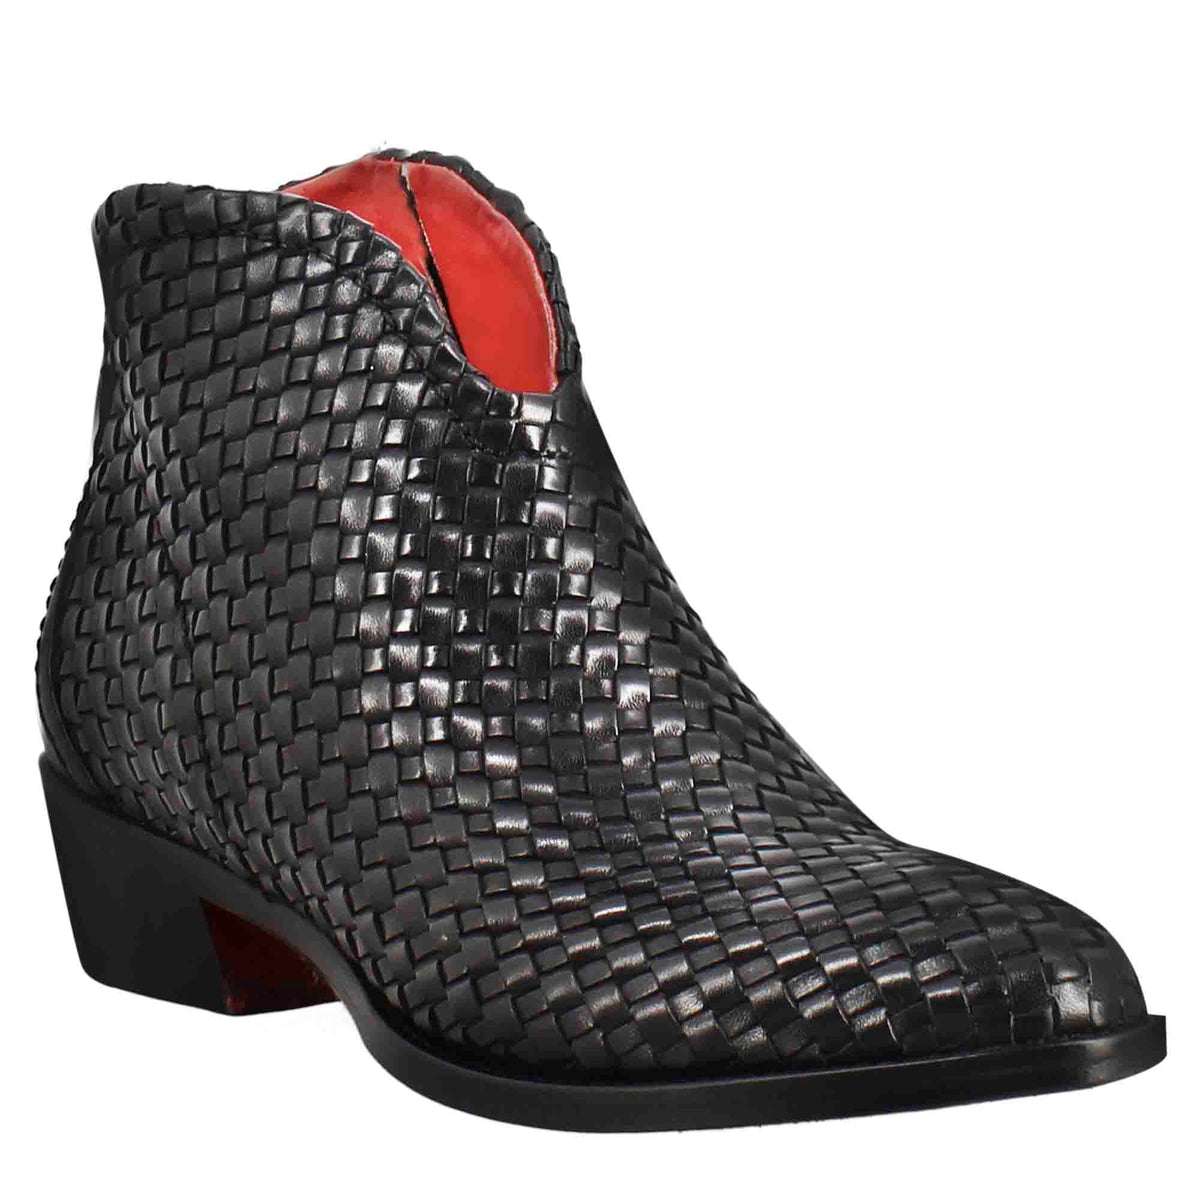 Women's ankle boot with medium heel in black woven leather